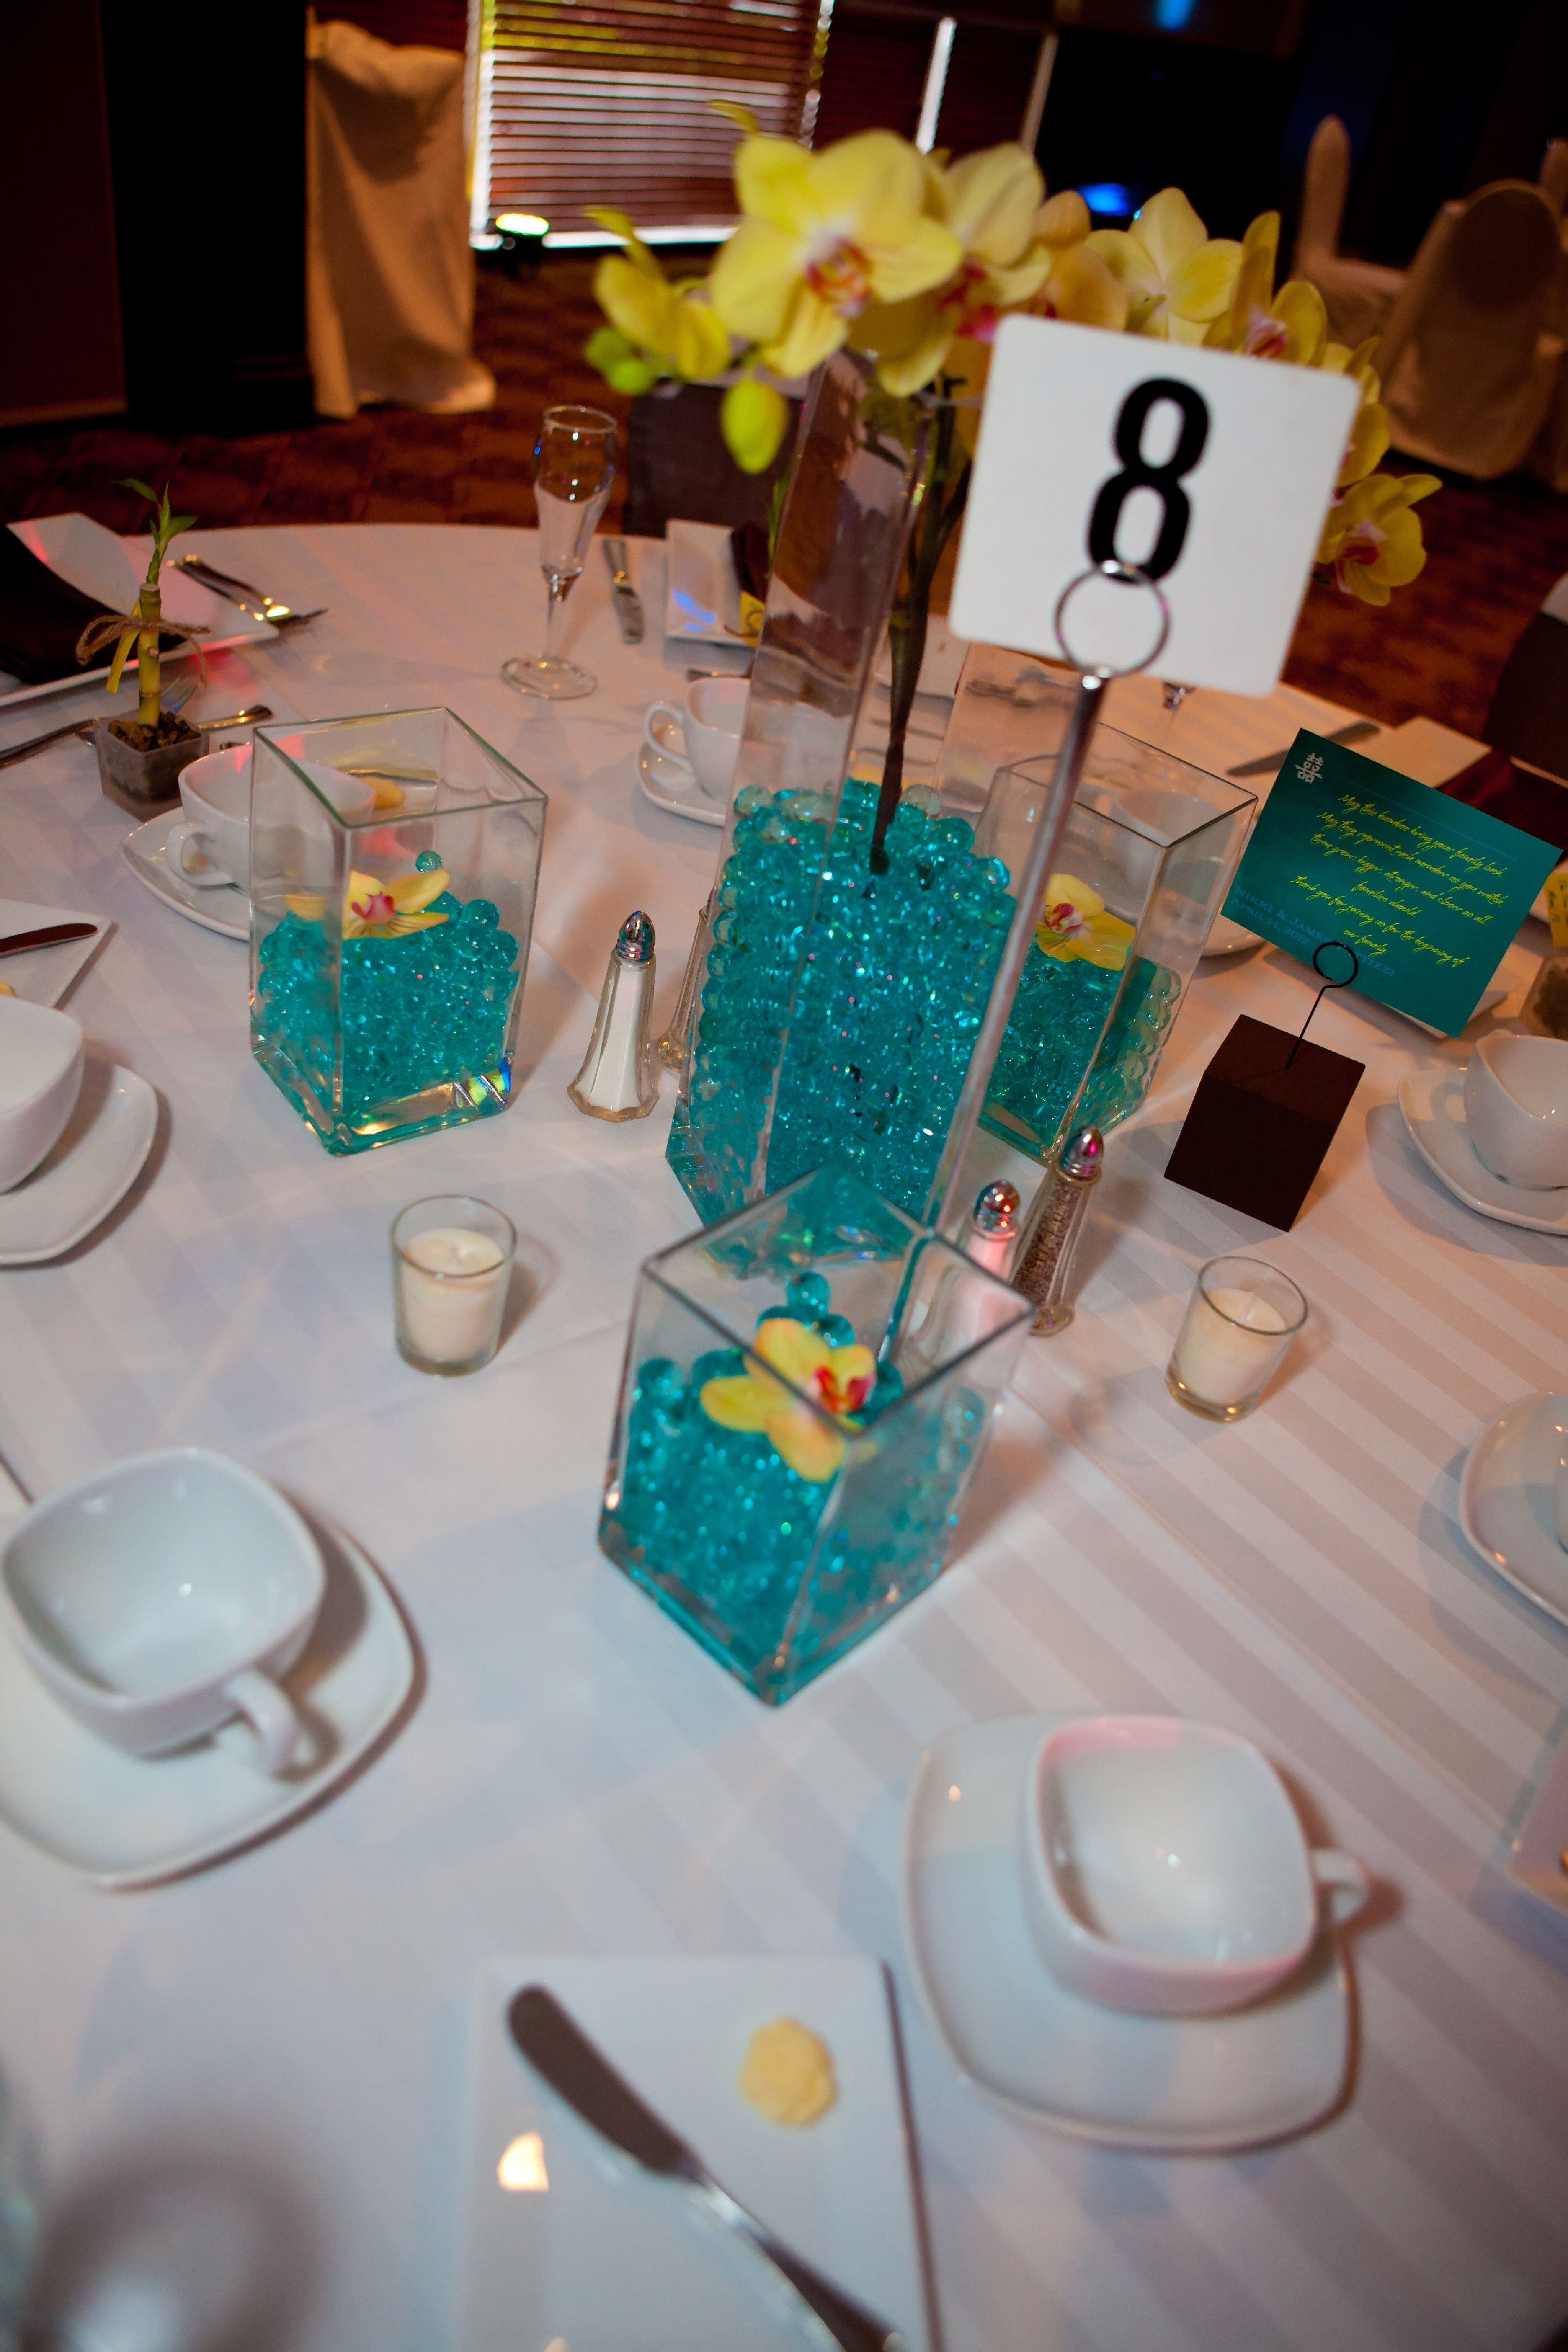 29 Trendy Big Gold Vase 2024 free download big gold vase of wedding centerpieces square vases teal water beads yellow with regard to square vases teal water beads yellow orchids candles